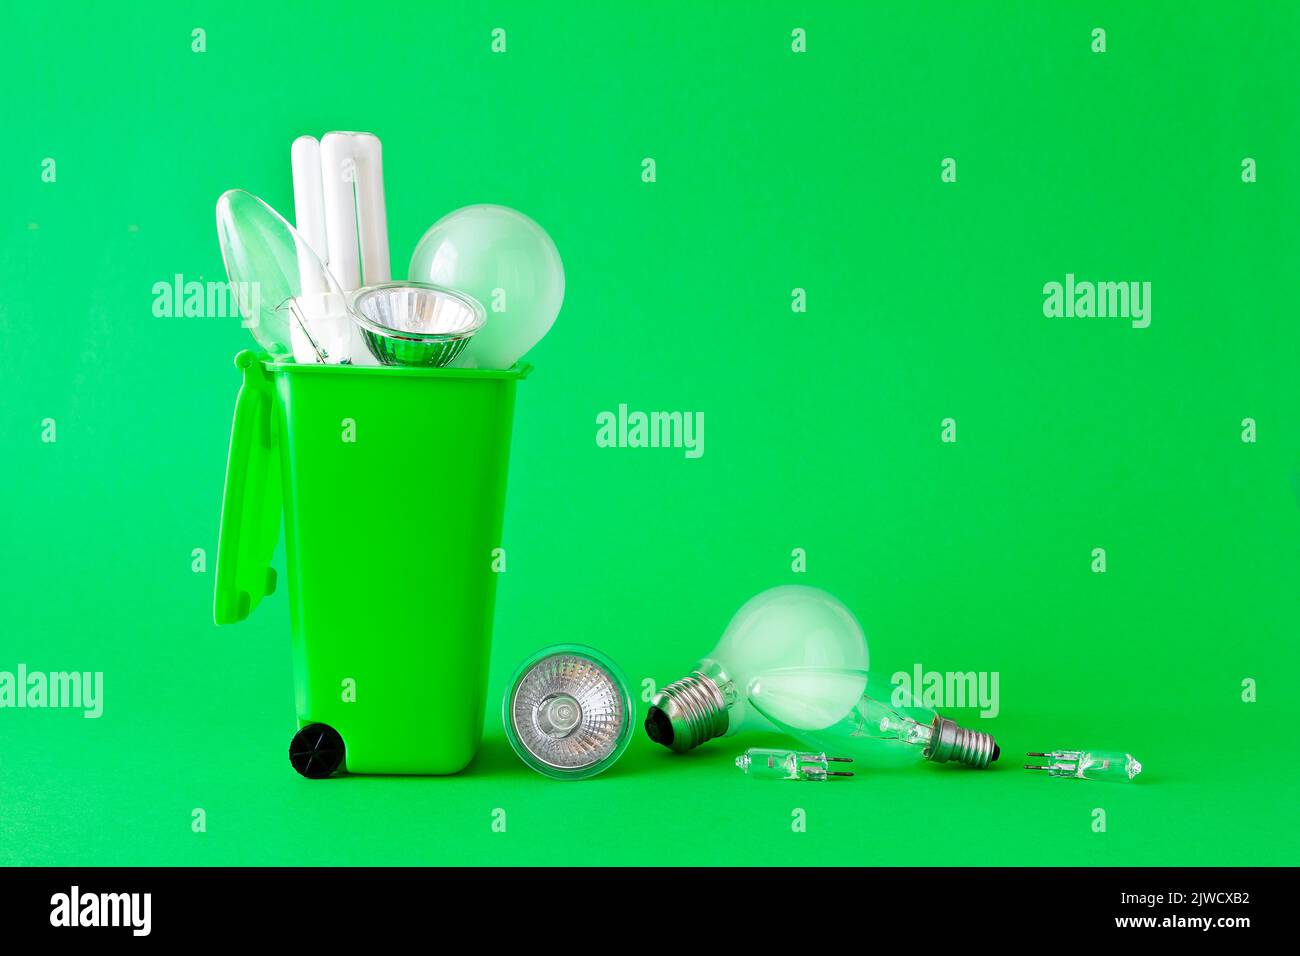 Green living concept: diverse old halogen and fluorescent light bulbs in and around a recycling bin, green background, text or copy space. Stock Photo